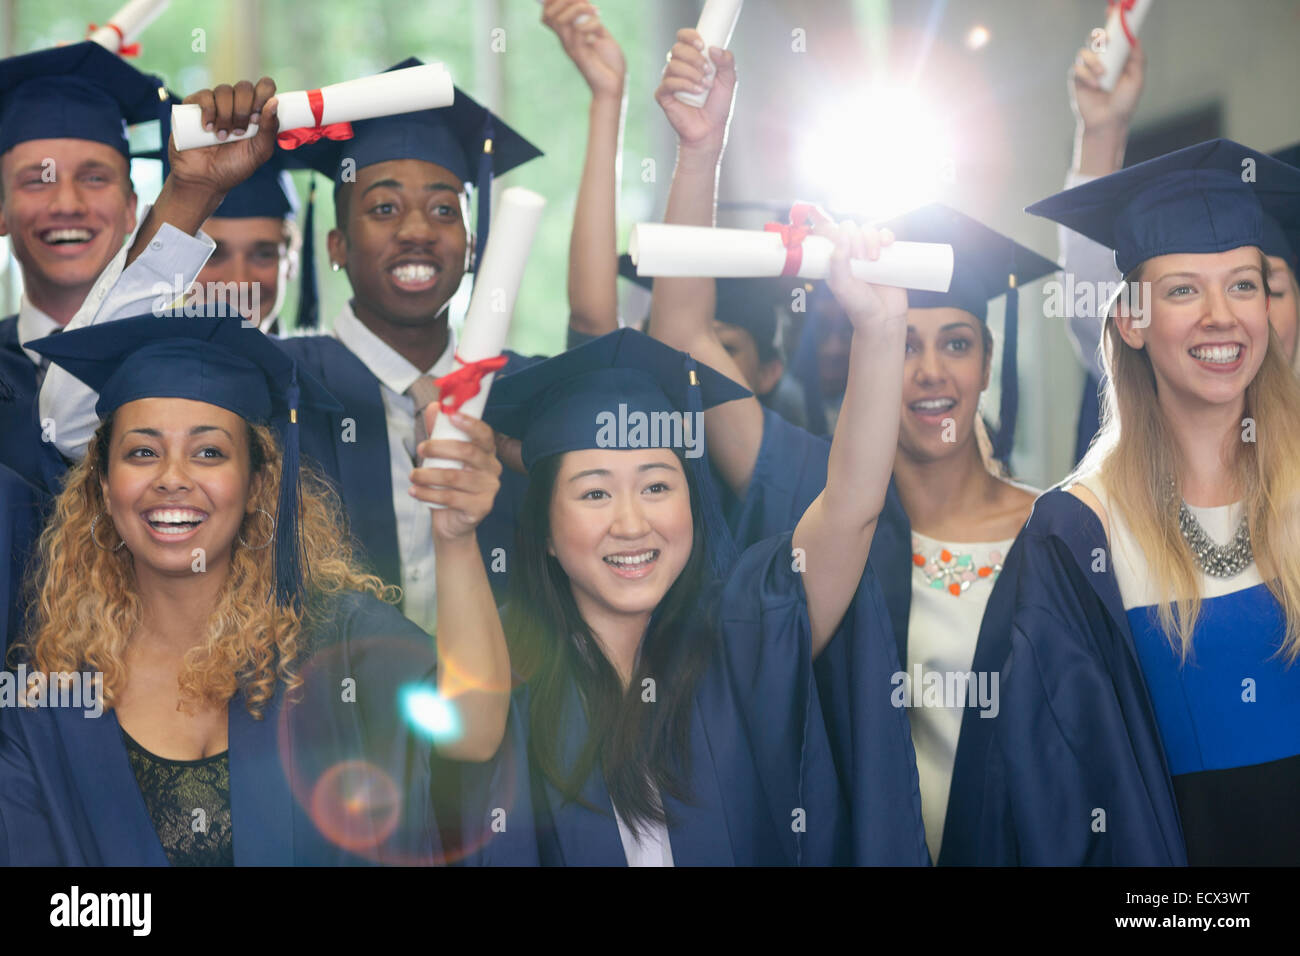 Smiling university students standing in corridor with their diplomas after graduation ceremony Stock Photo